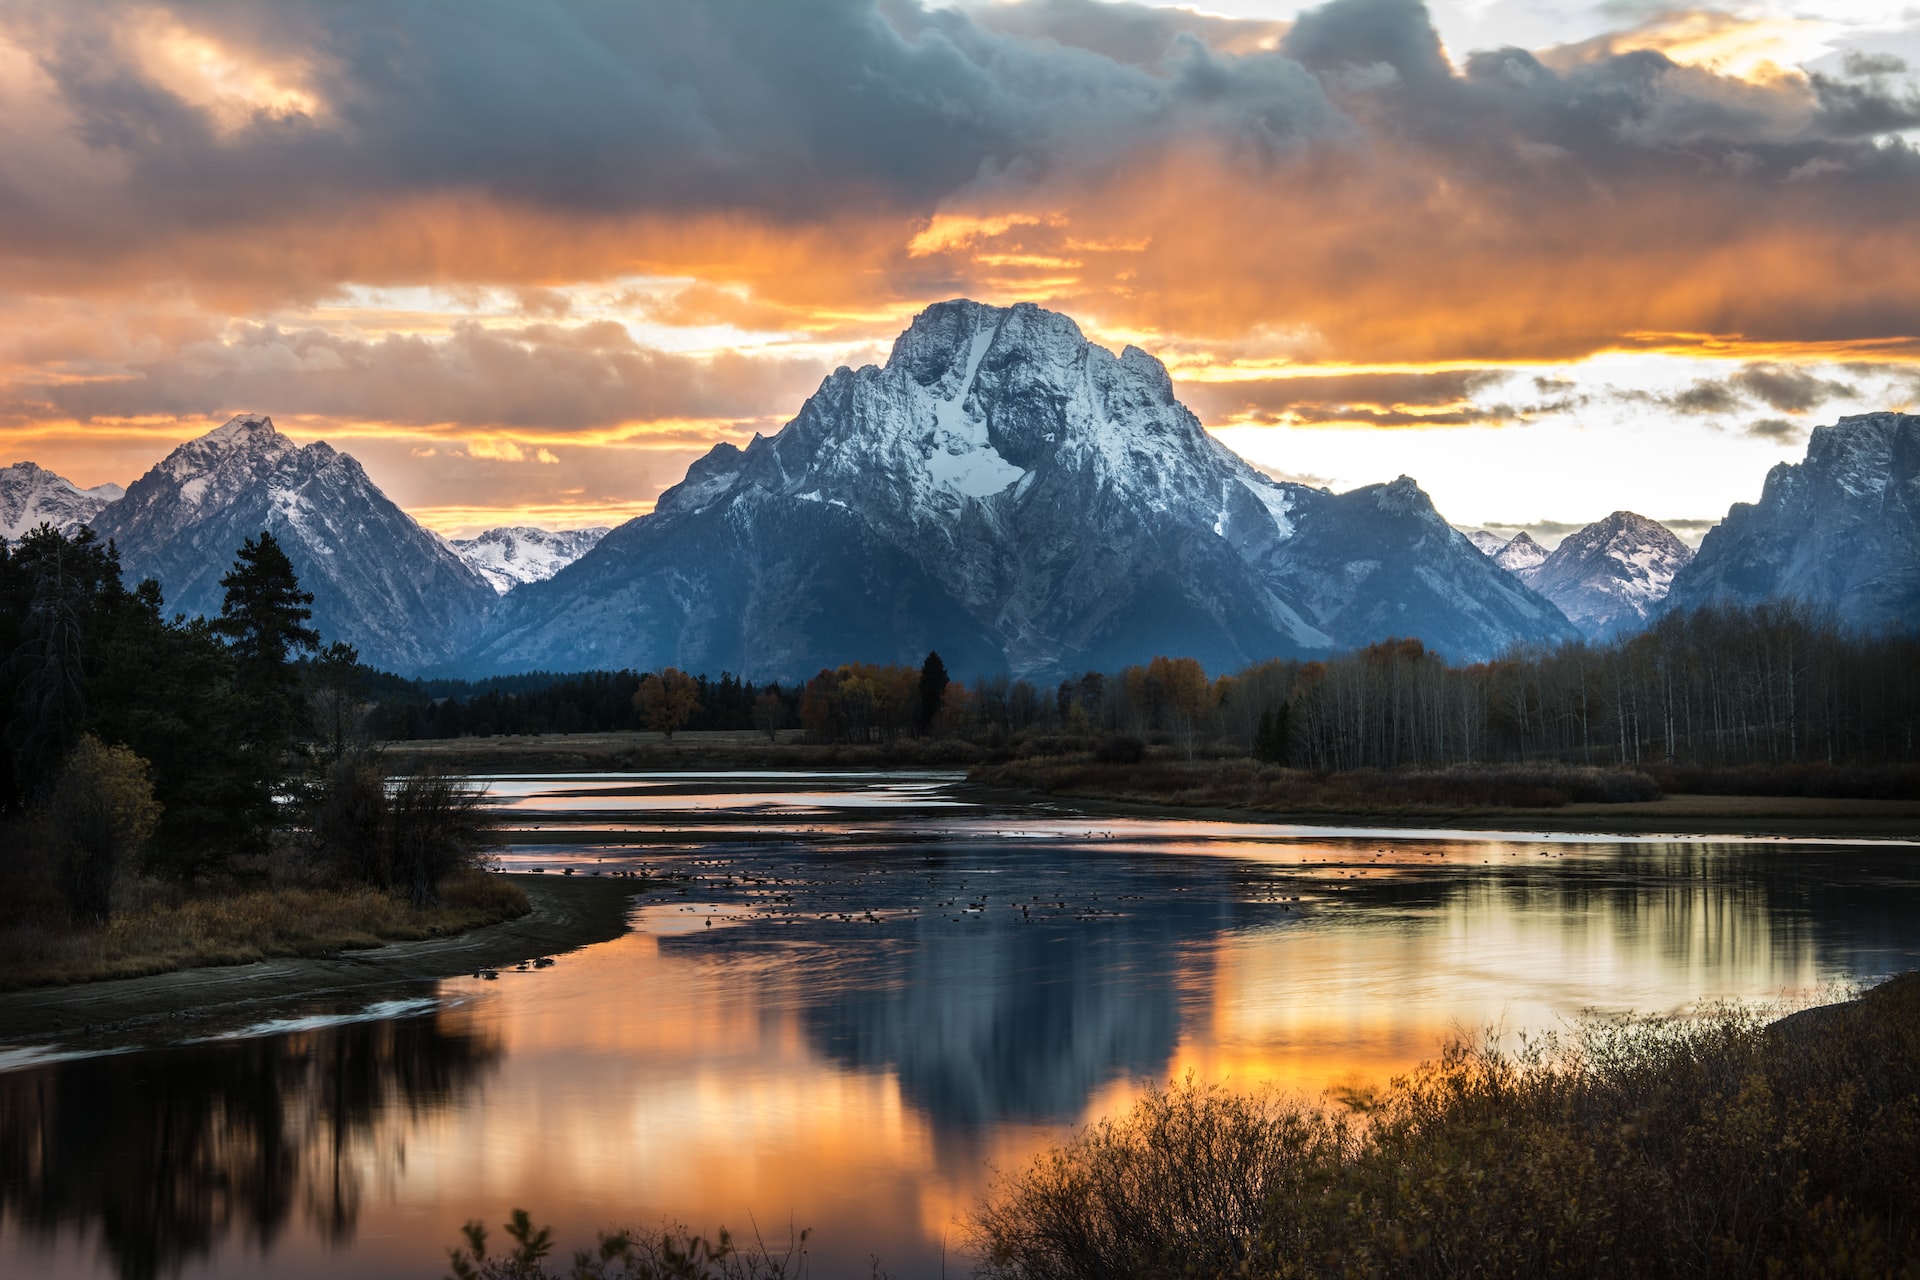 The Grand Tetons with snow on their peaks with the Oxbow Bend of the river in the foreground.